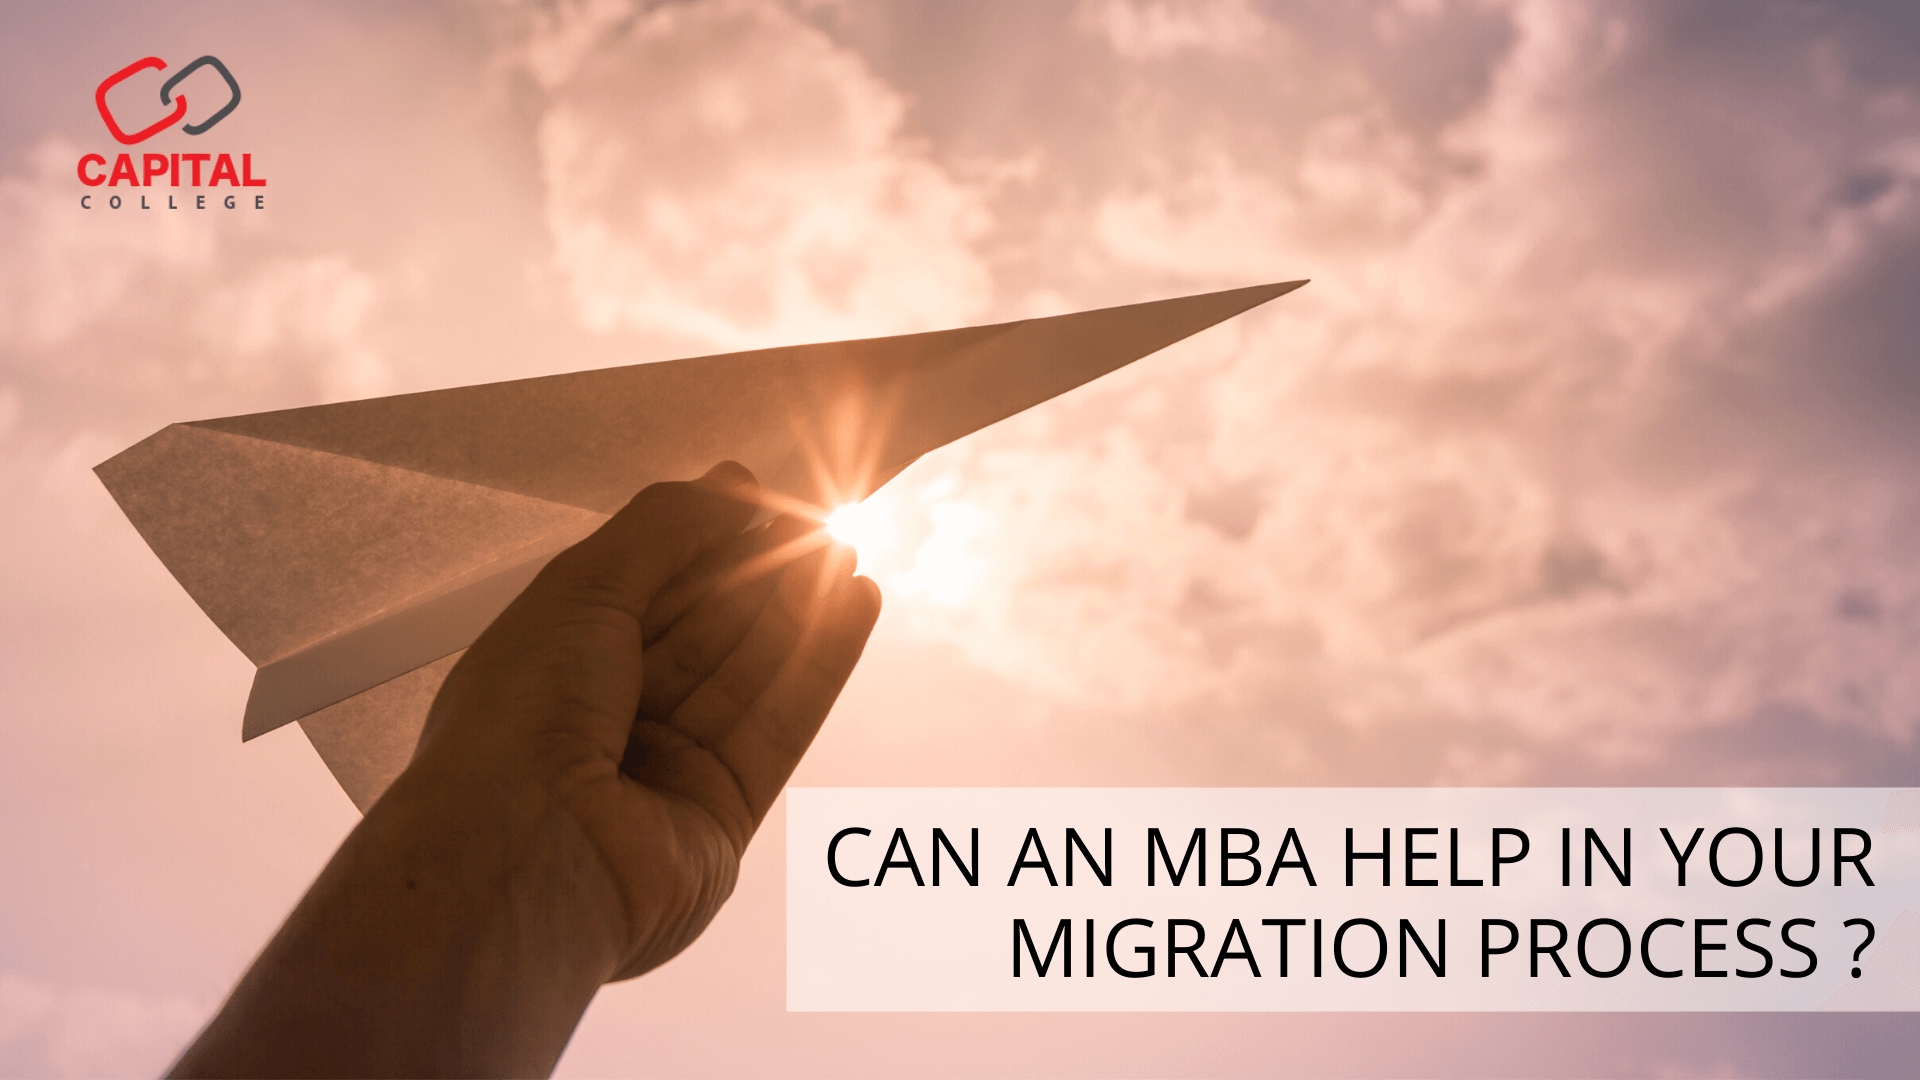 Can an MBA help in your migration process?